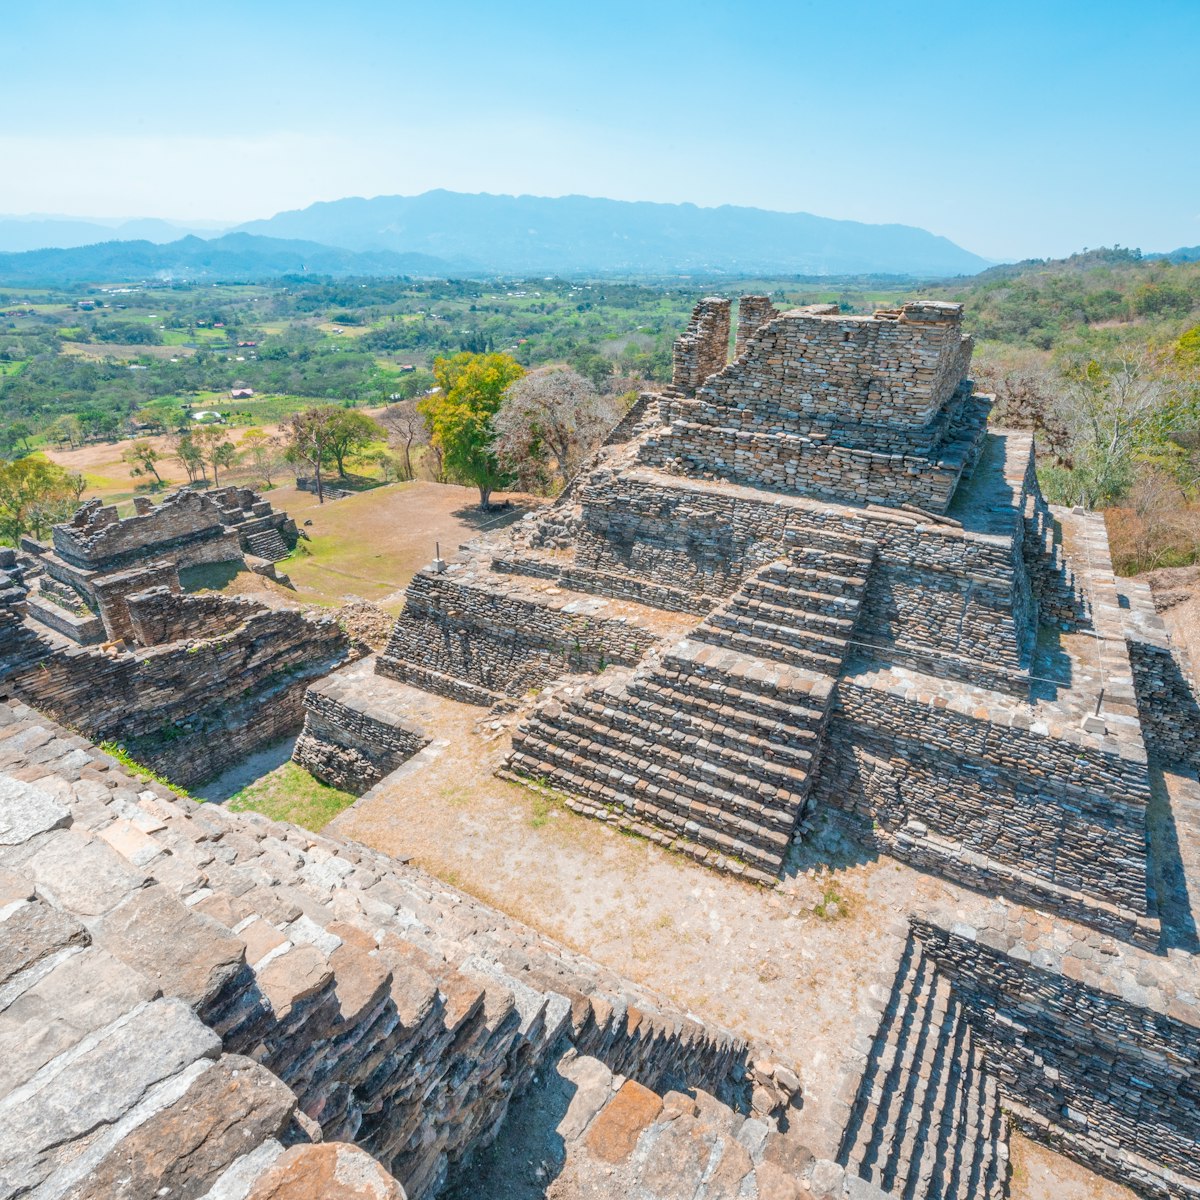 The ancient pyramids of Tonina, a Mayan Archaeological Site in Chiapas, Mexico.